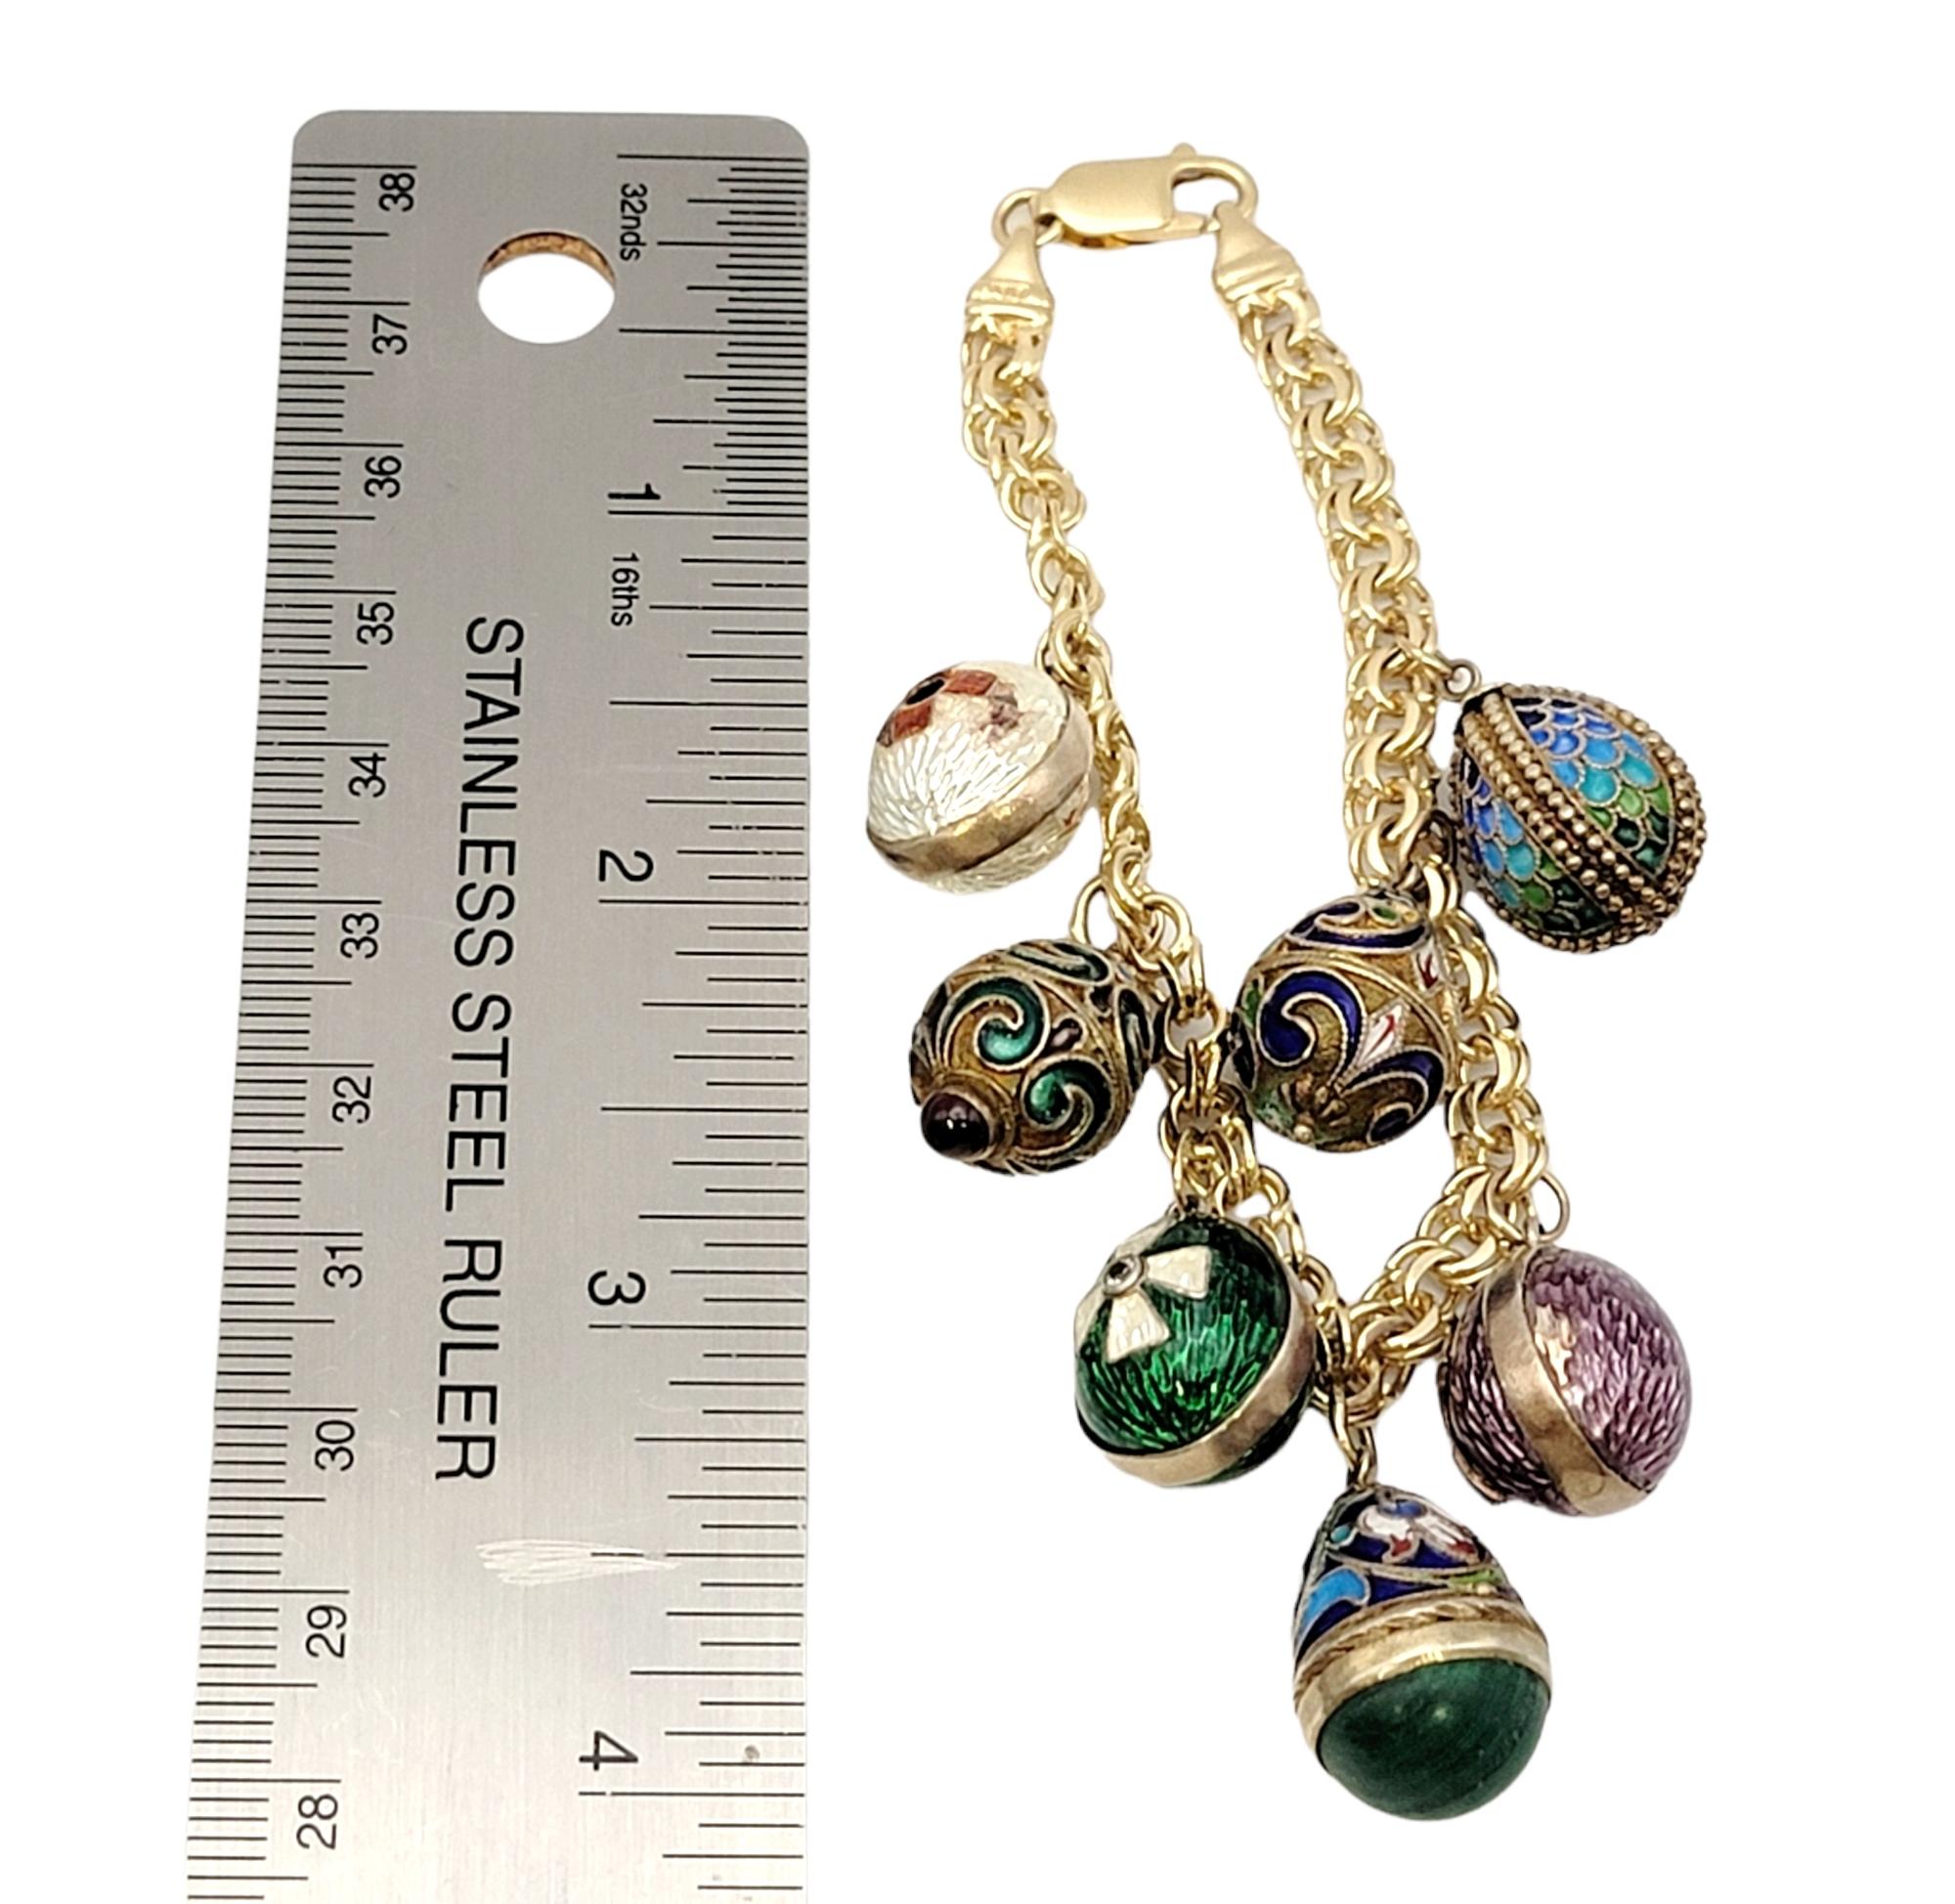 Vintage 14 Karat Yellow Gold Charm Bracelet with 7 Colorful Enamel Egg Charms For Sale 8